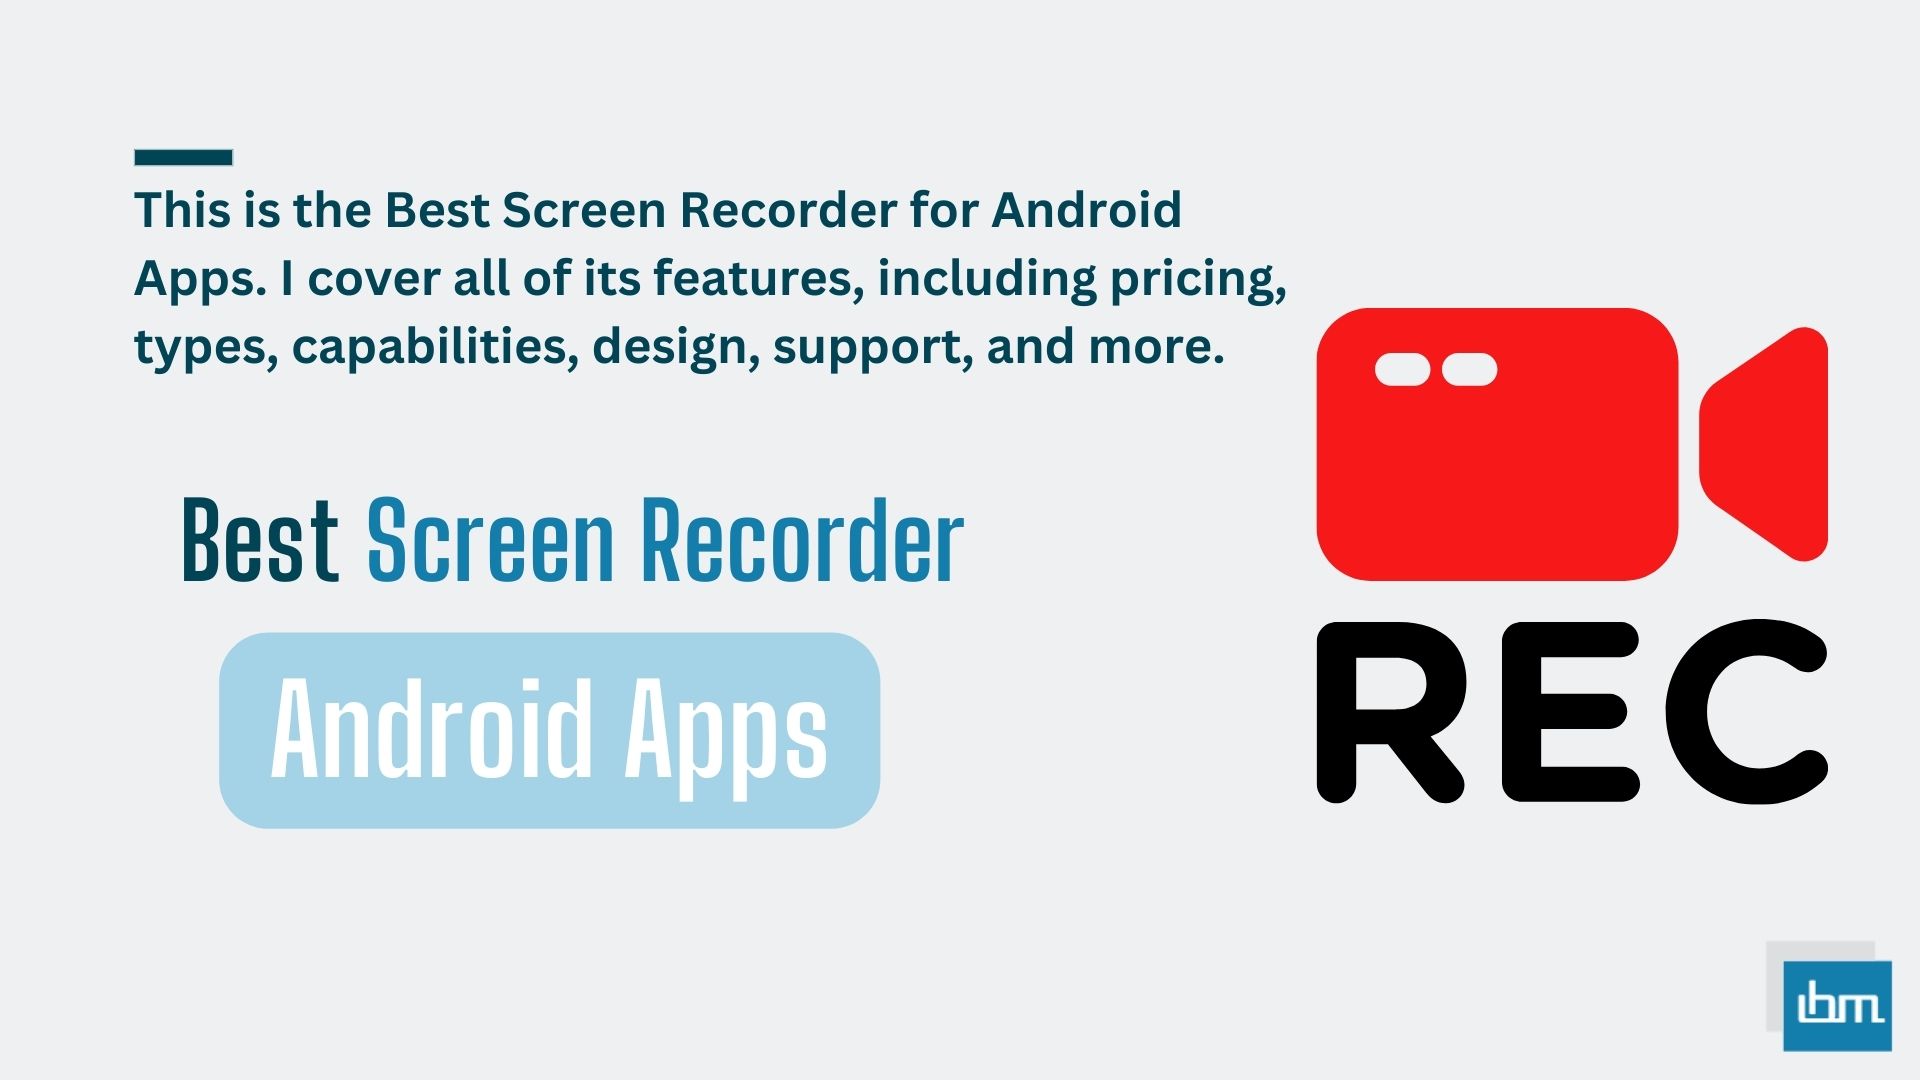 Best Screen Recorder for Android Apps